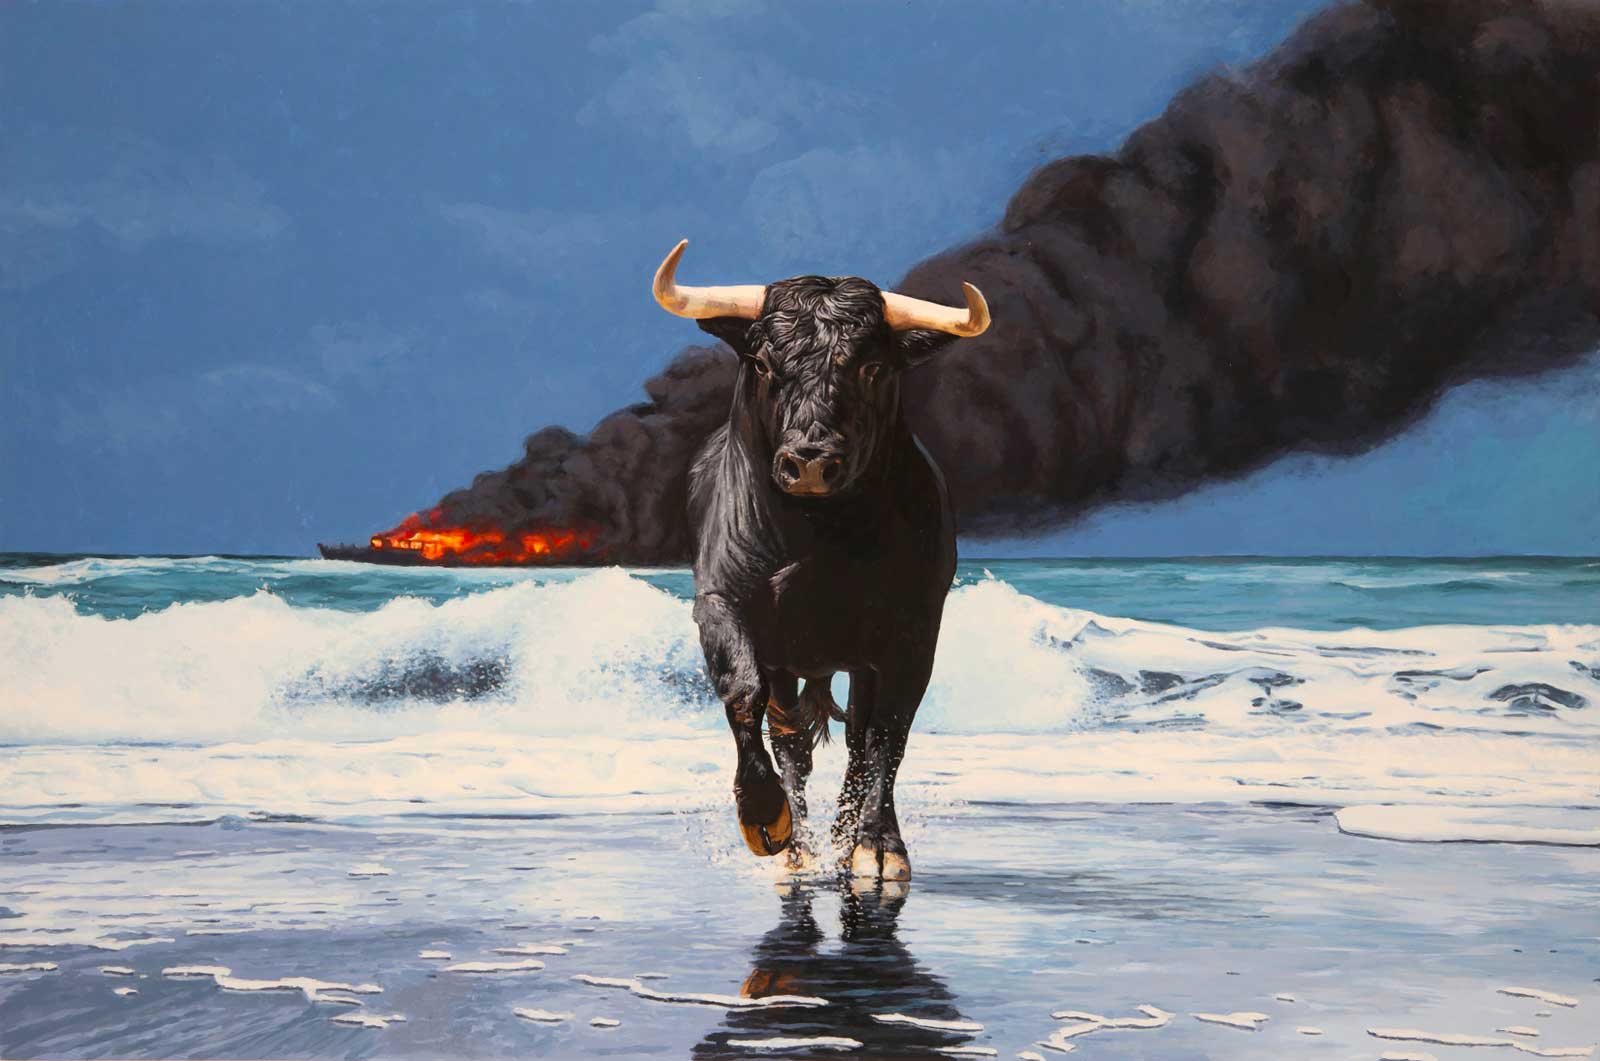 Painting by Josh keyes of a dark bull running ashore with a burning ship in the background